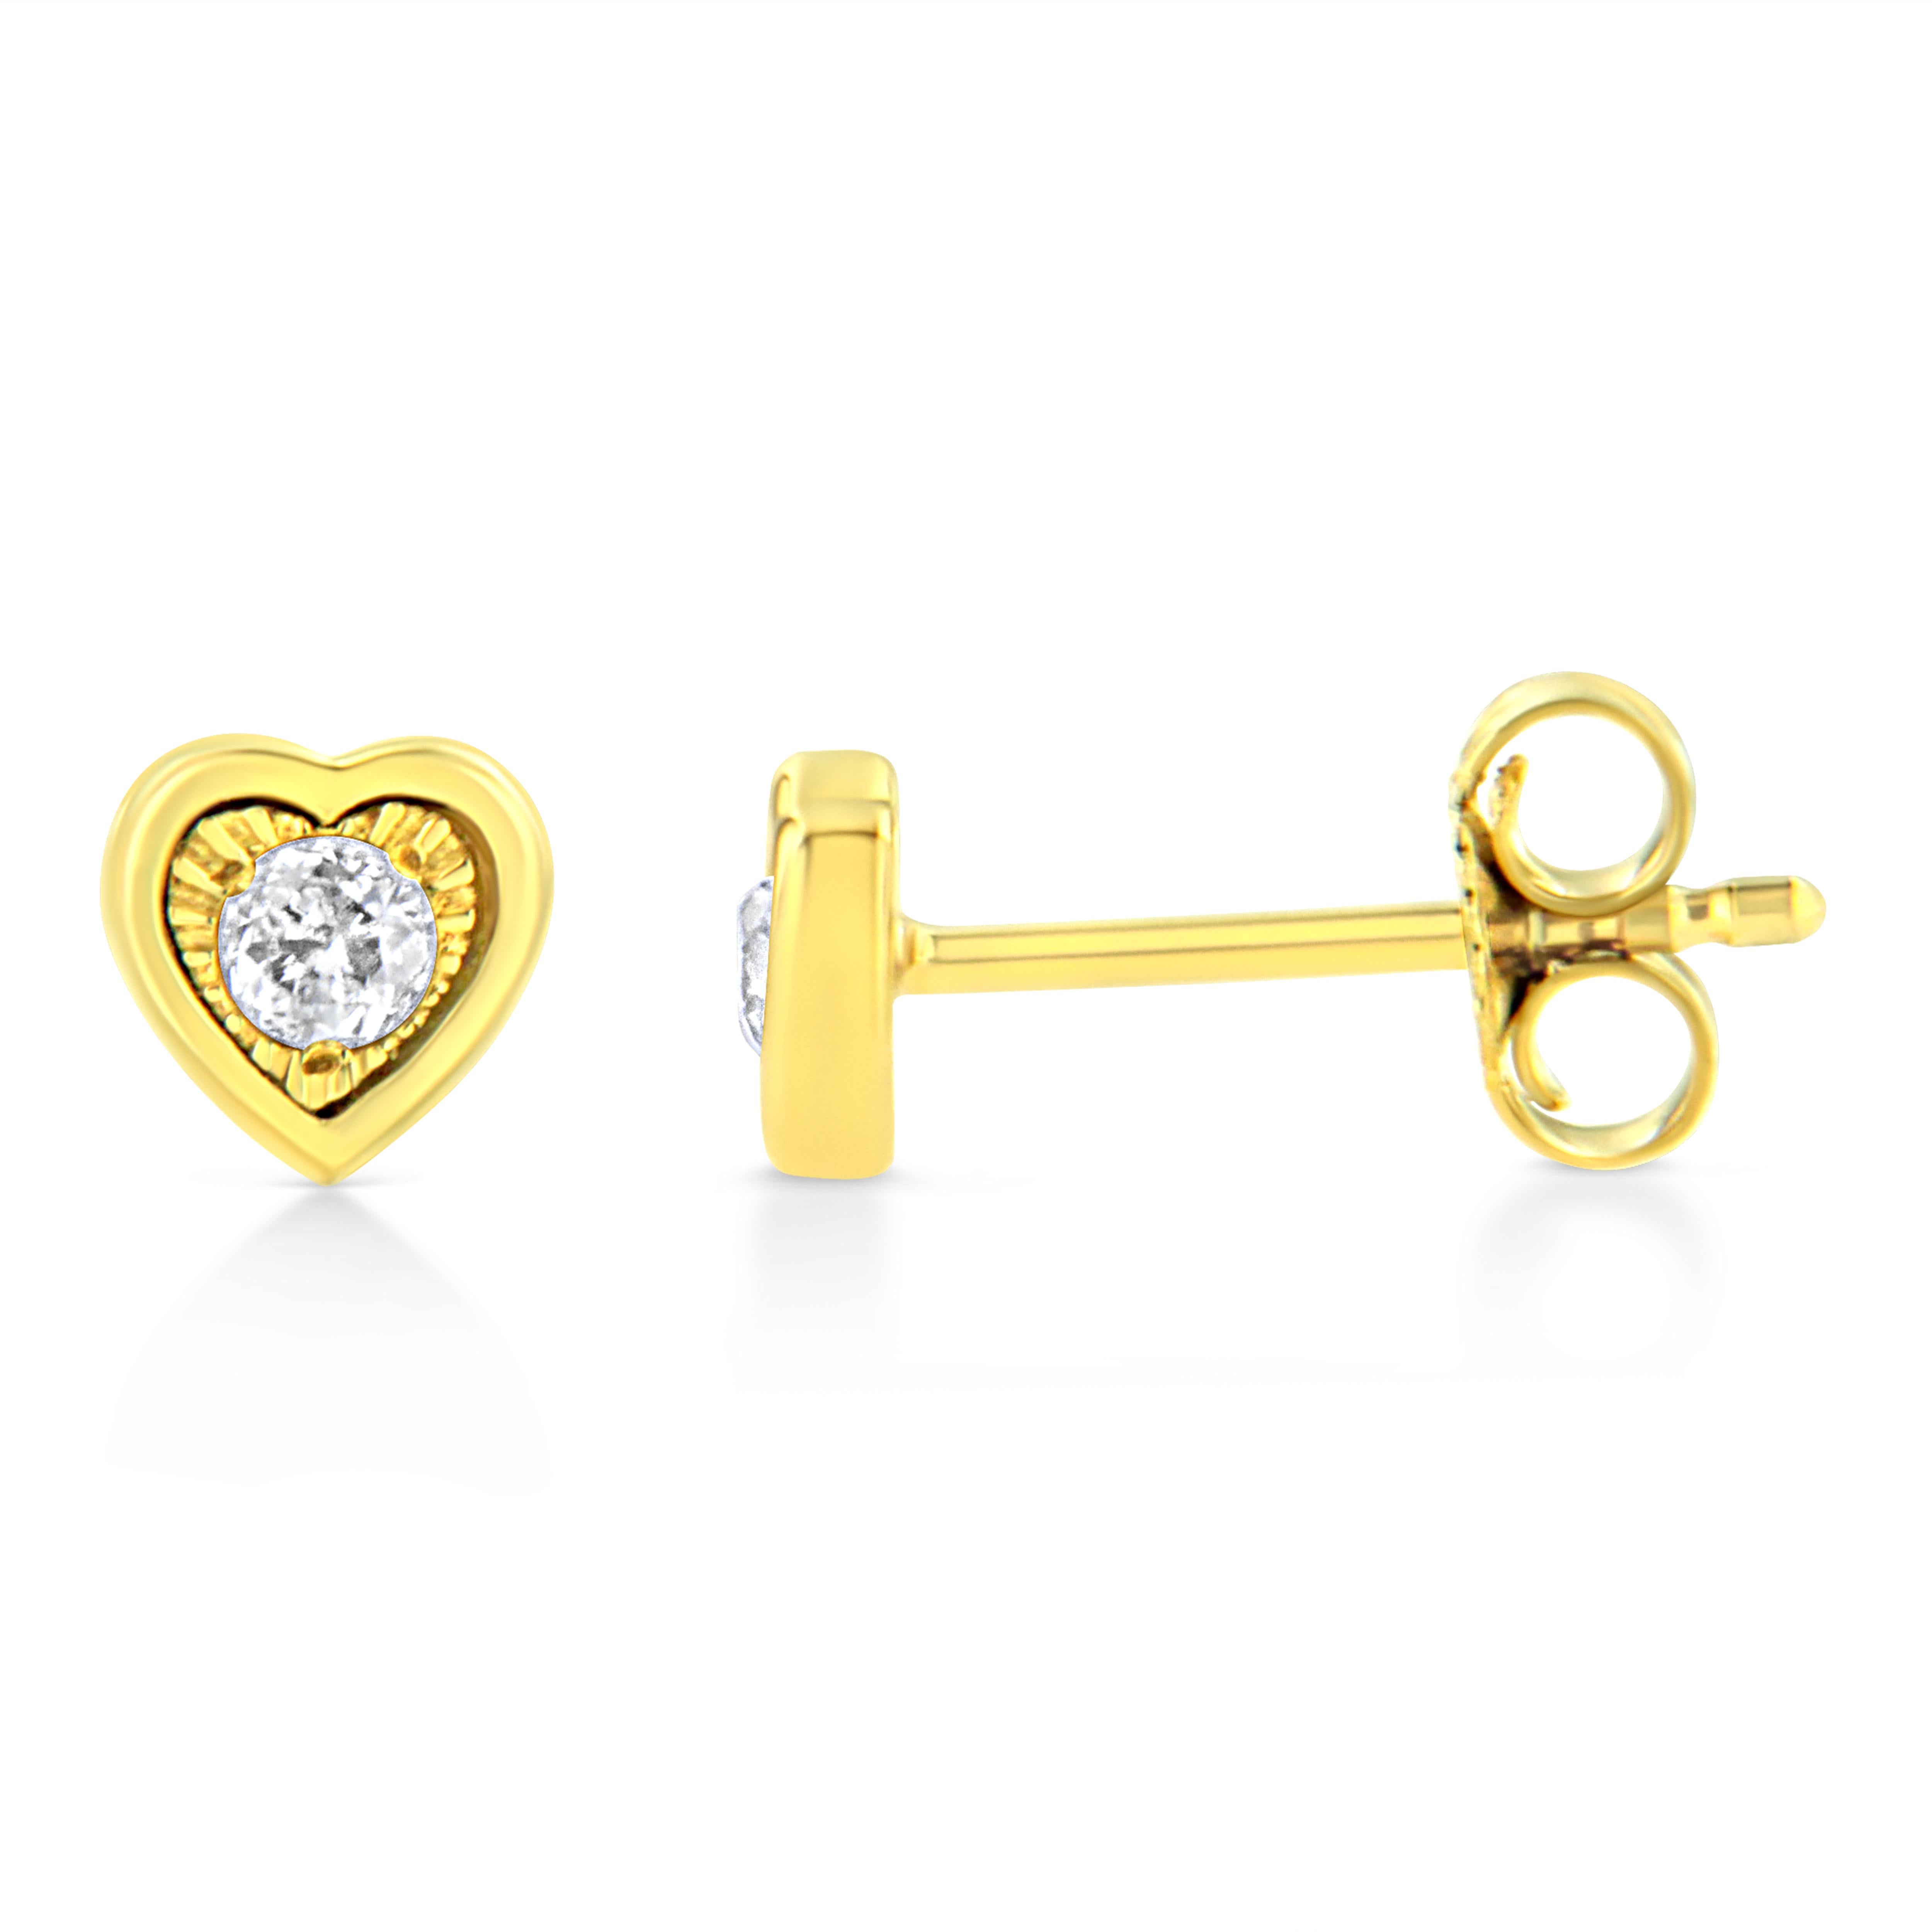 Contemporary Yellow Gold Plated Sterling Silver 1/10 Carat Diamond Heart Shape Stud Earrings For Sale